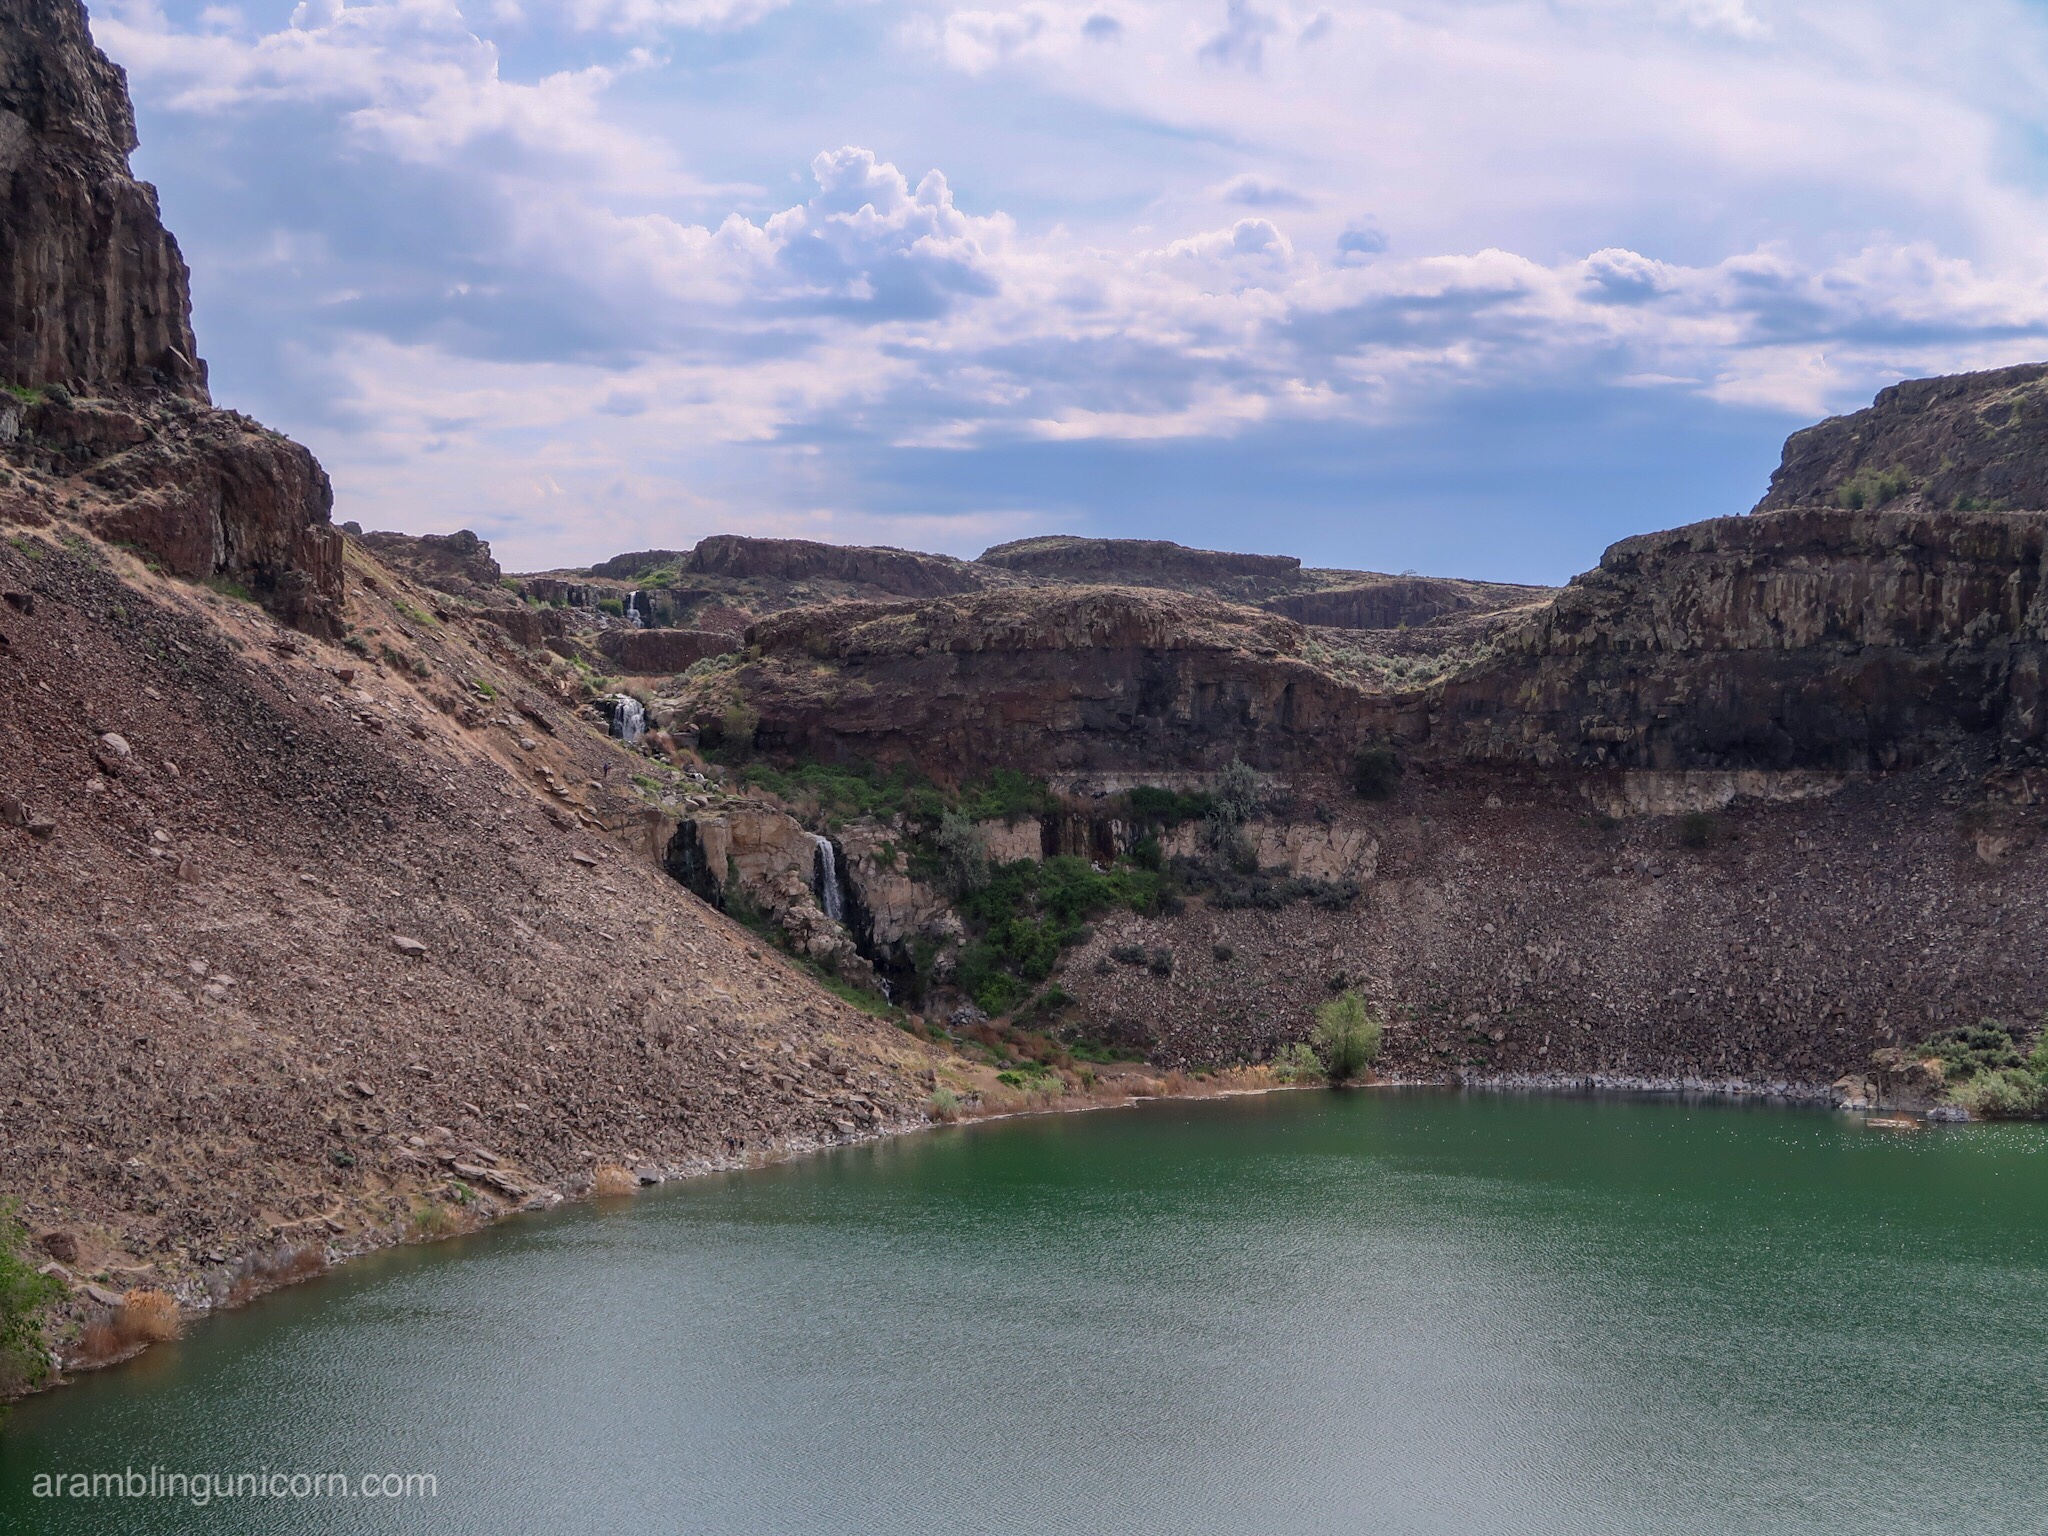 Sandy Trails and Blue Skies: Exploring Ancient Lakes in the Columbia Basin Wildlife Area